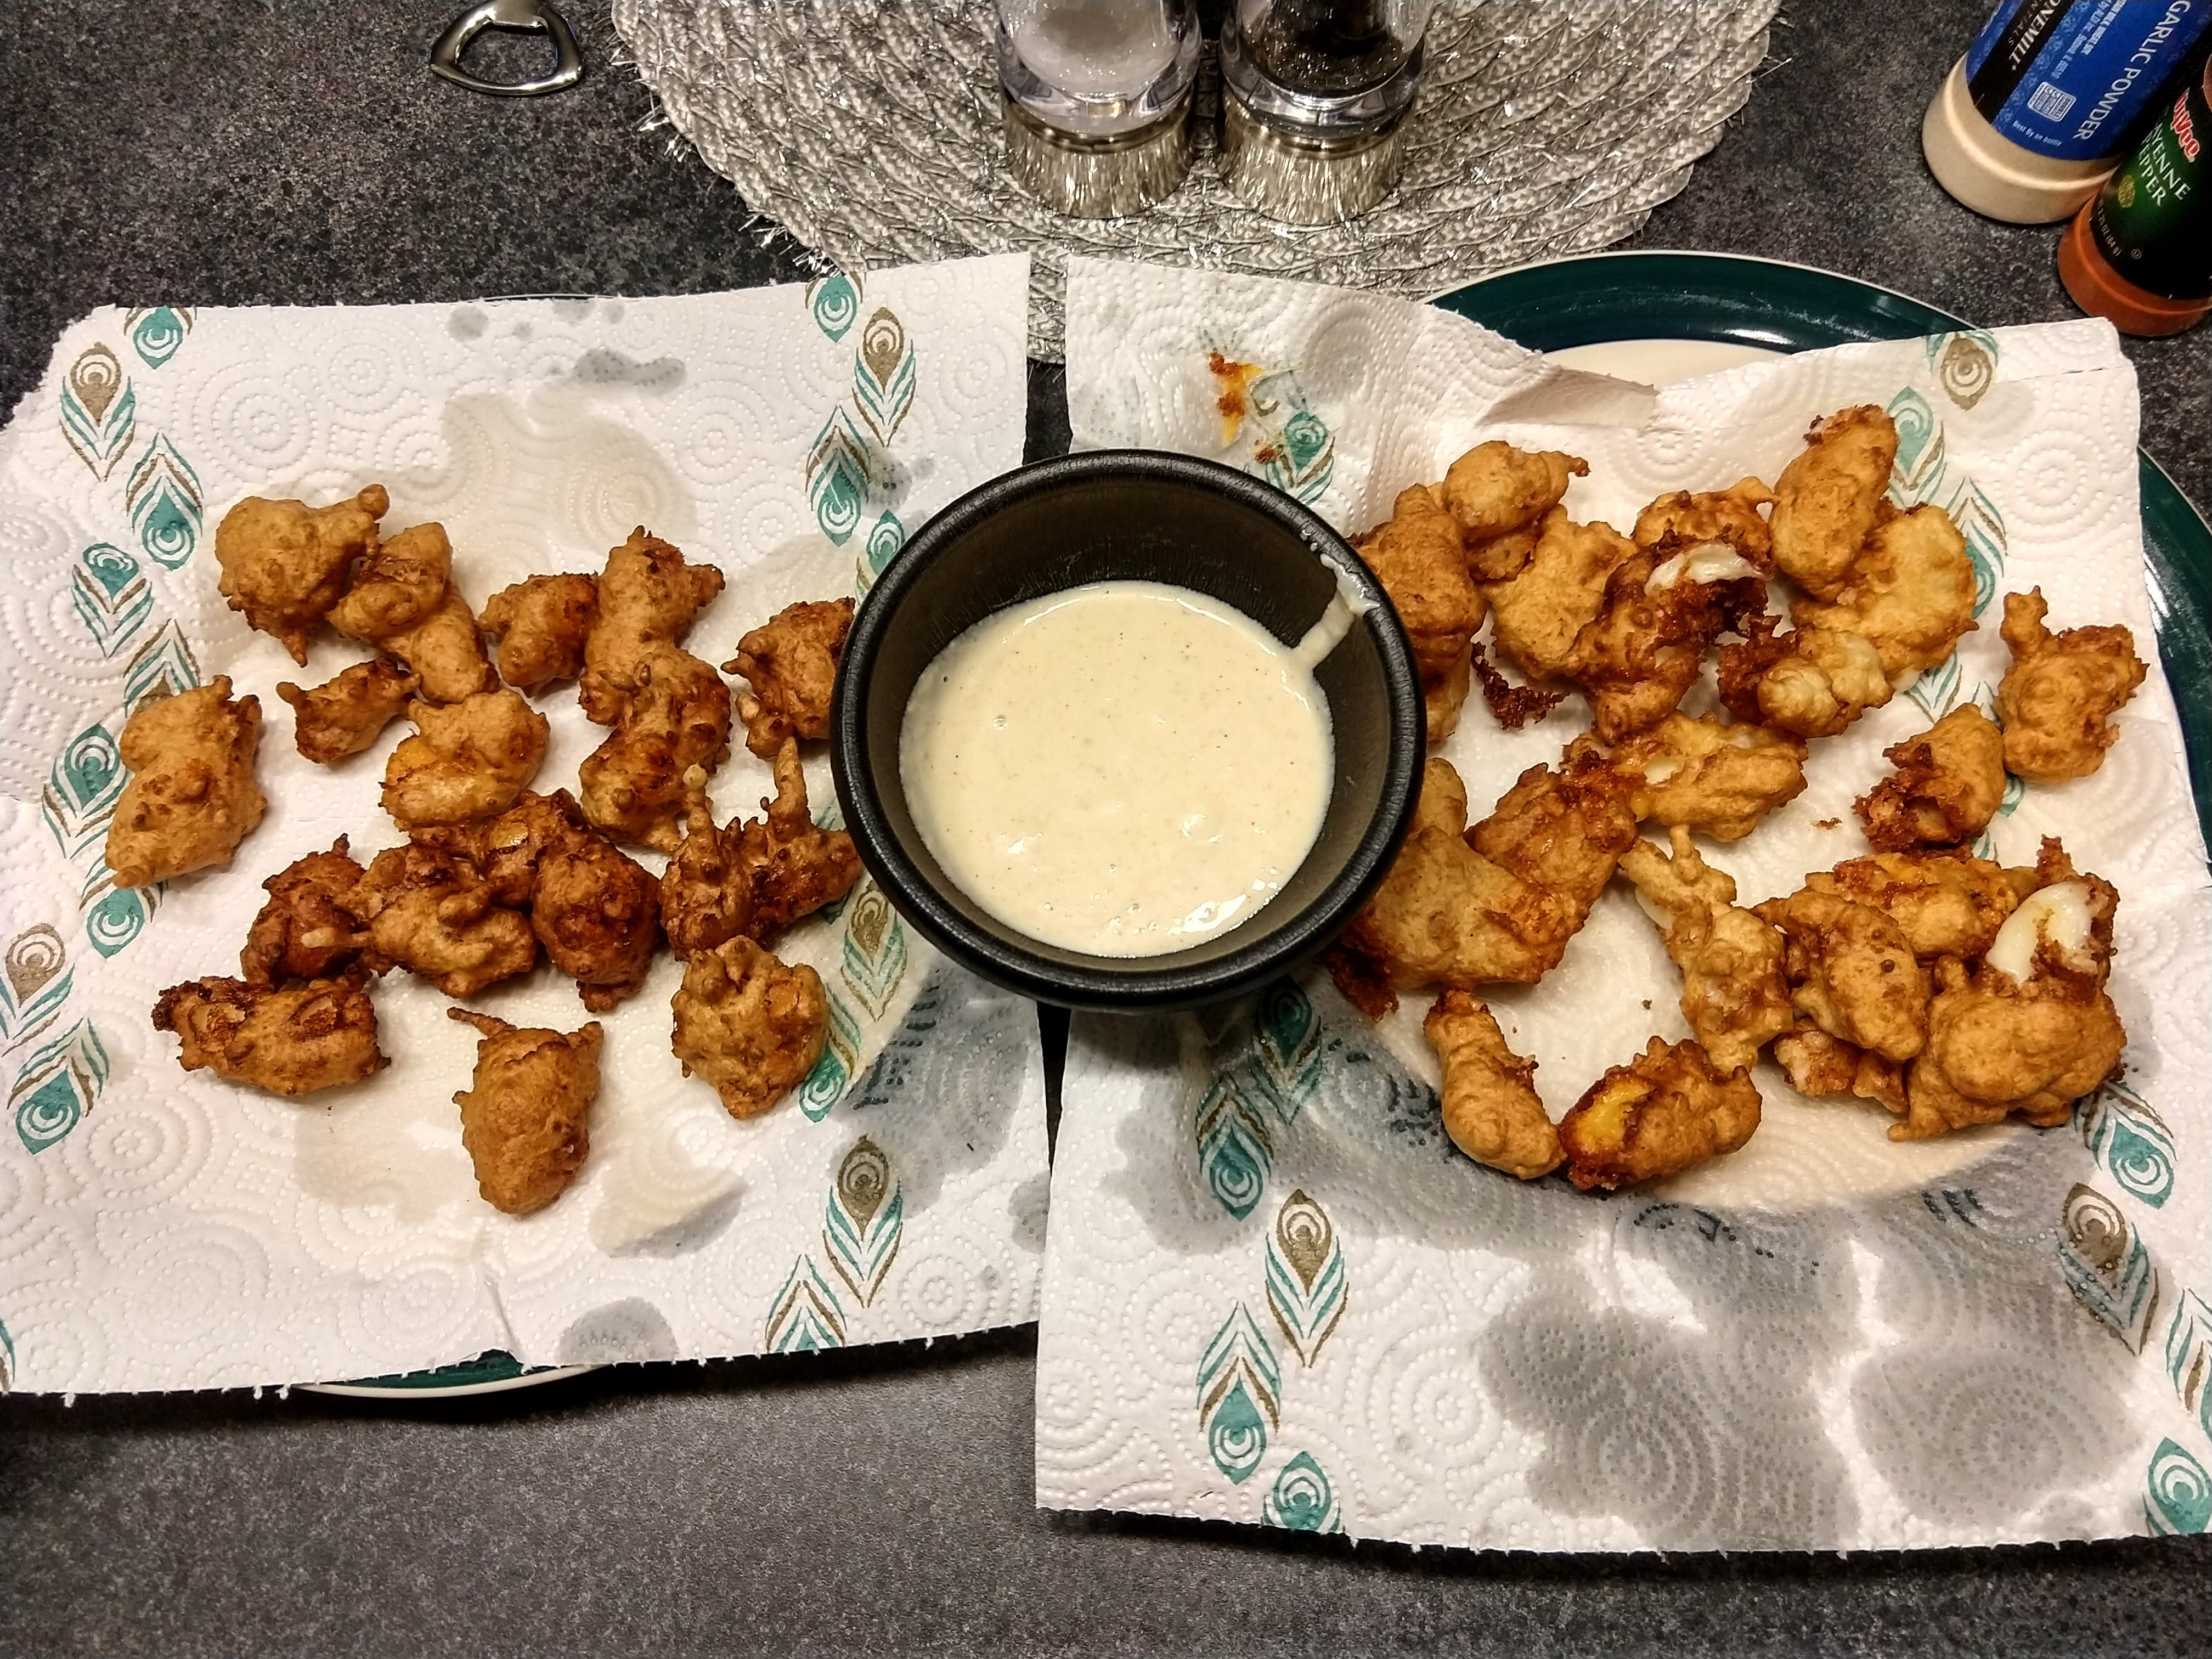 Curds with dipping sauce